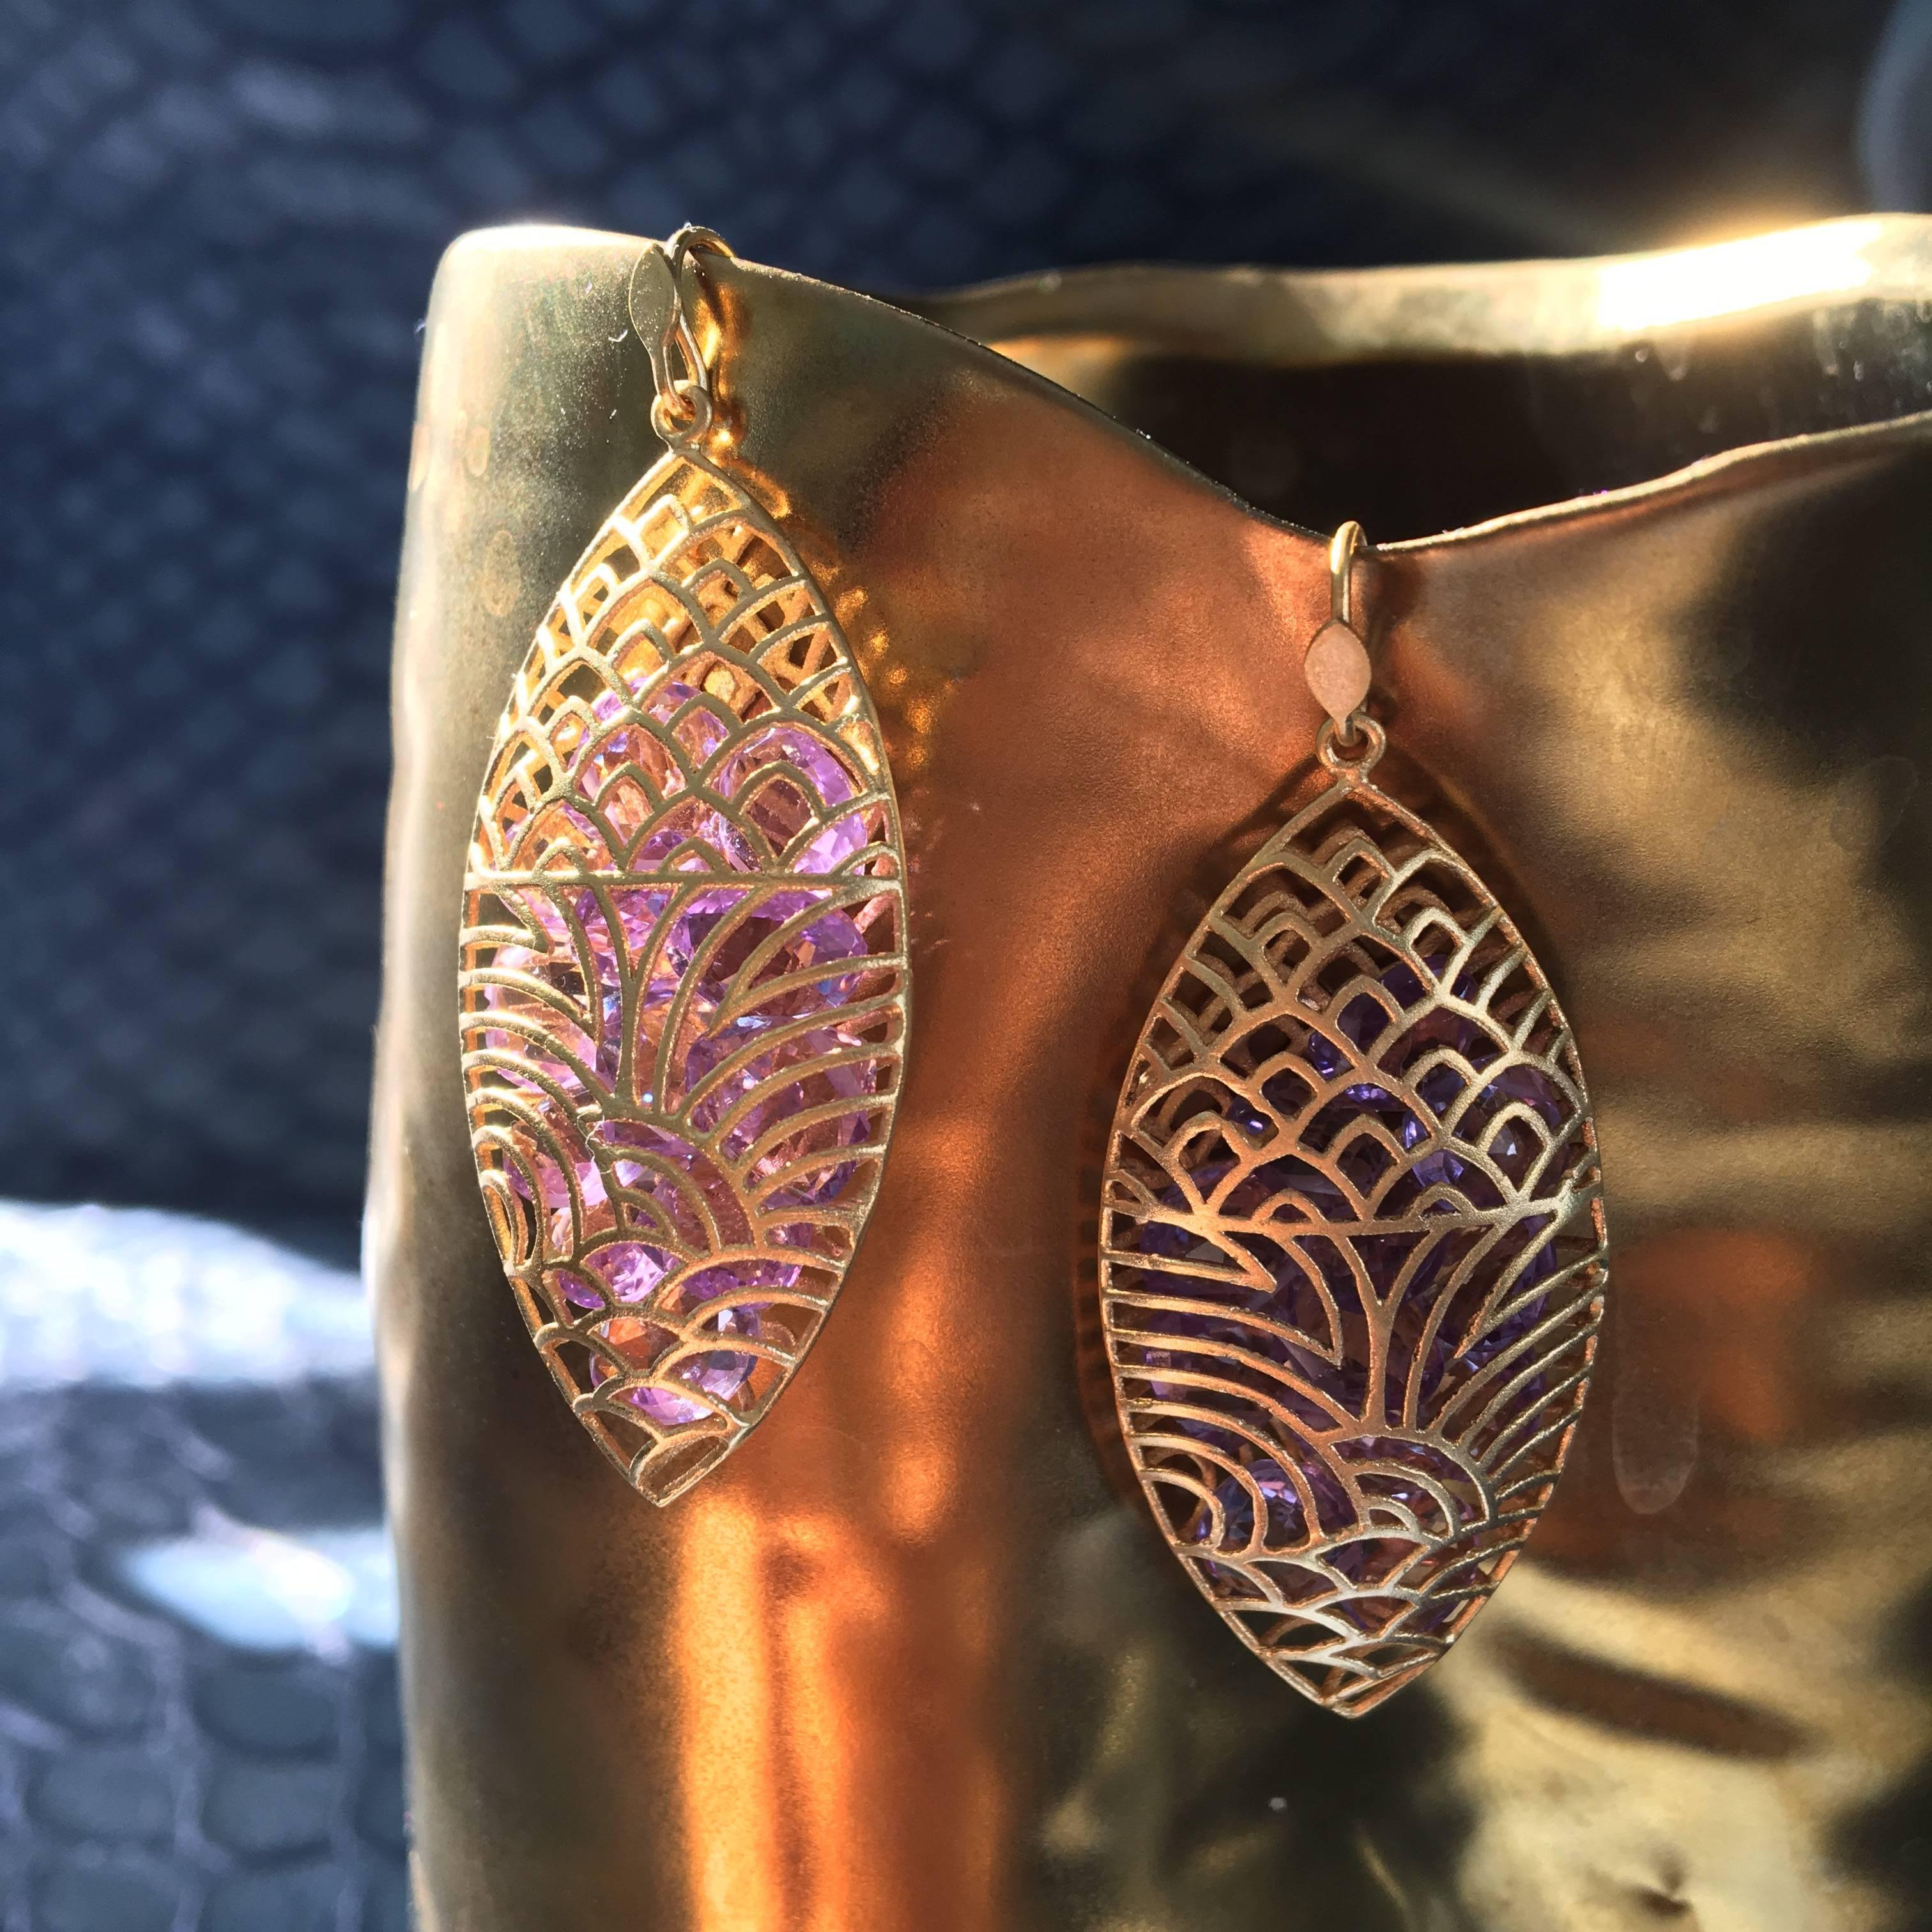 Amethysts float inside these 18kt yellow gold marquis shaped caged earrings, catching the light in a 
playful and unique design.  Finished in Lauren Harper's signature matte gold finish, these earrings are fabulous for evening or daytime.  Light